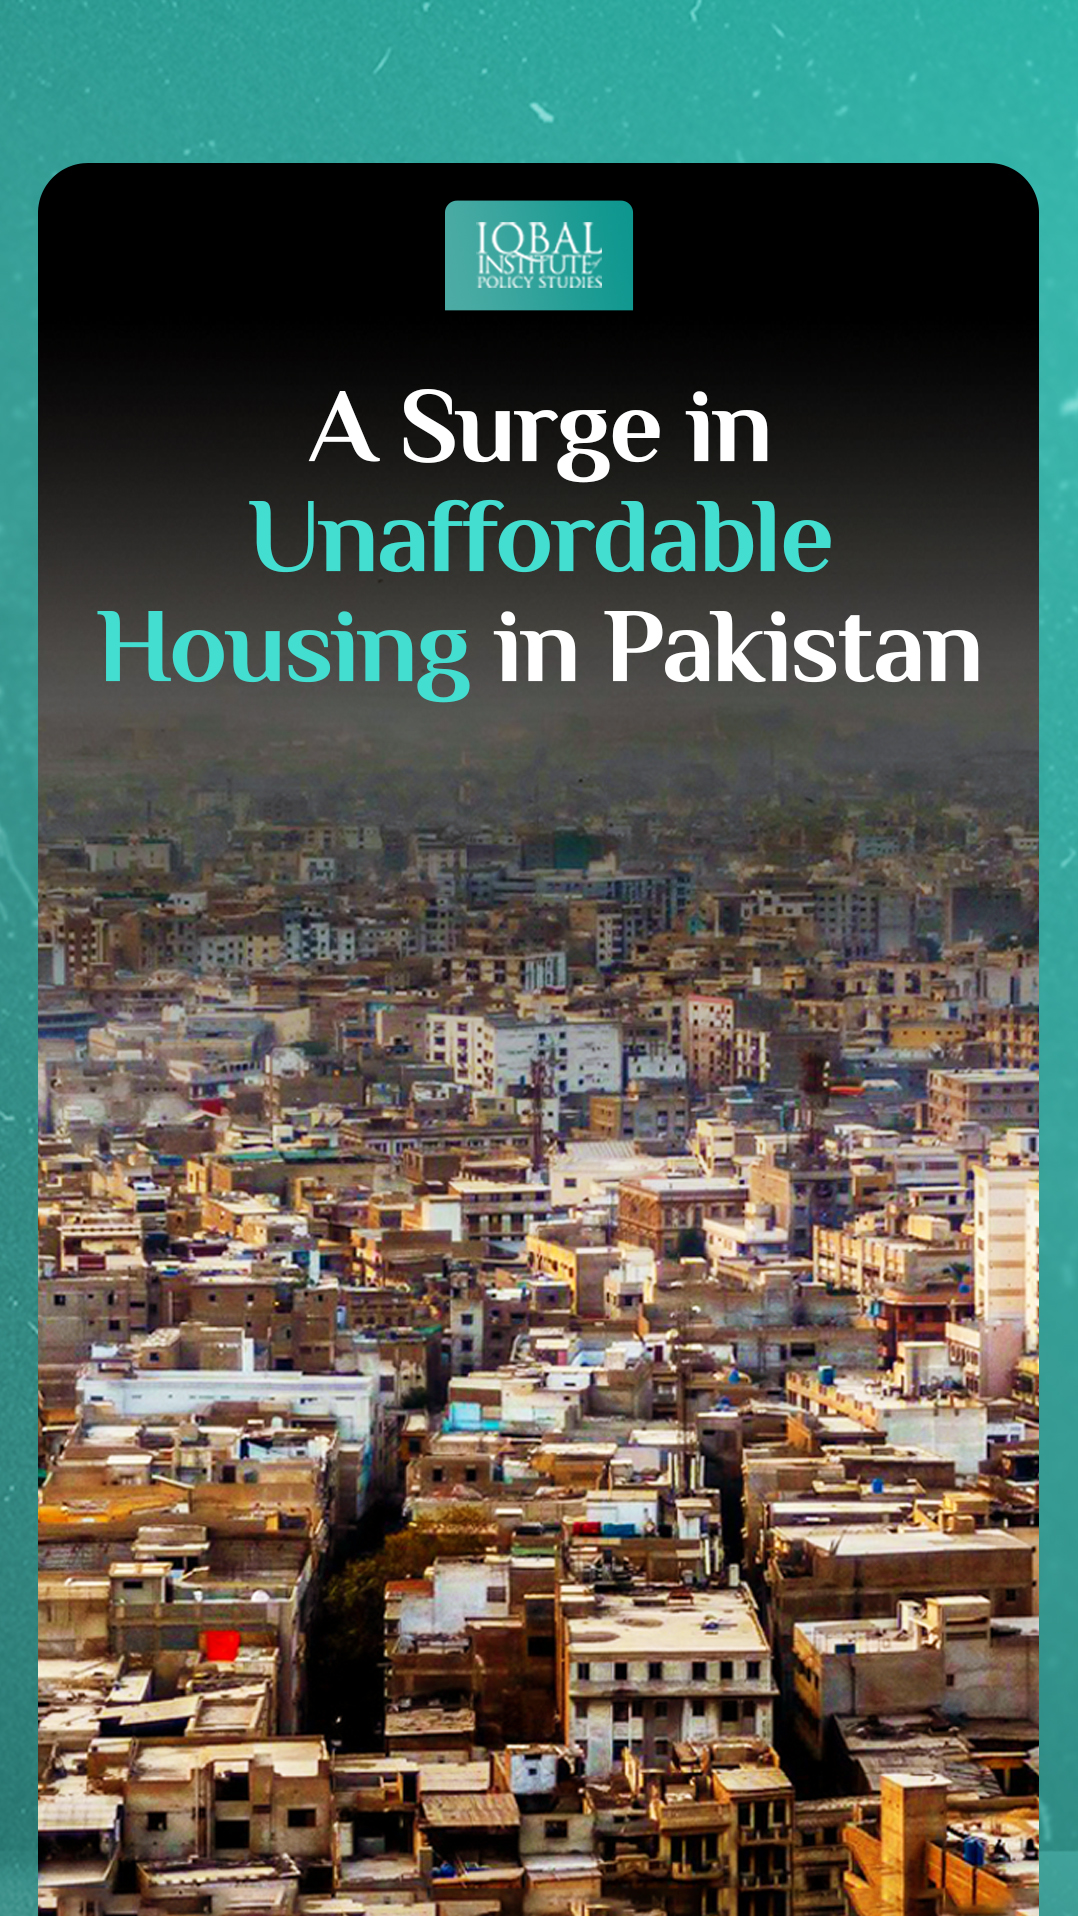 A Surge in Unaffordable Housing in Pakistan